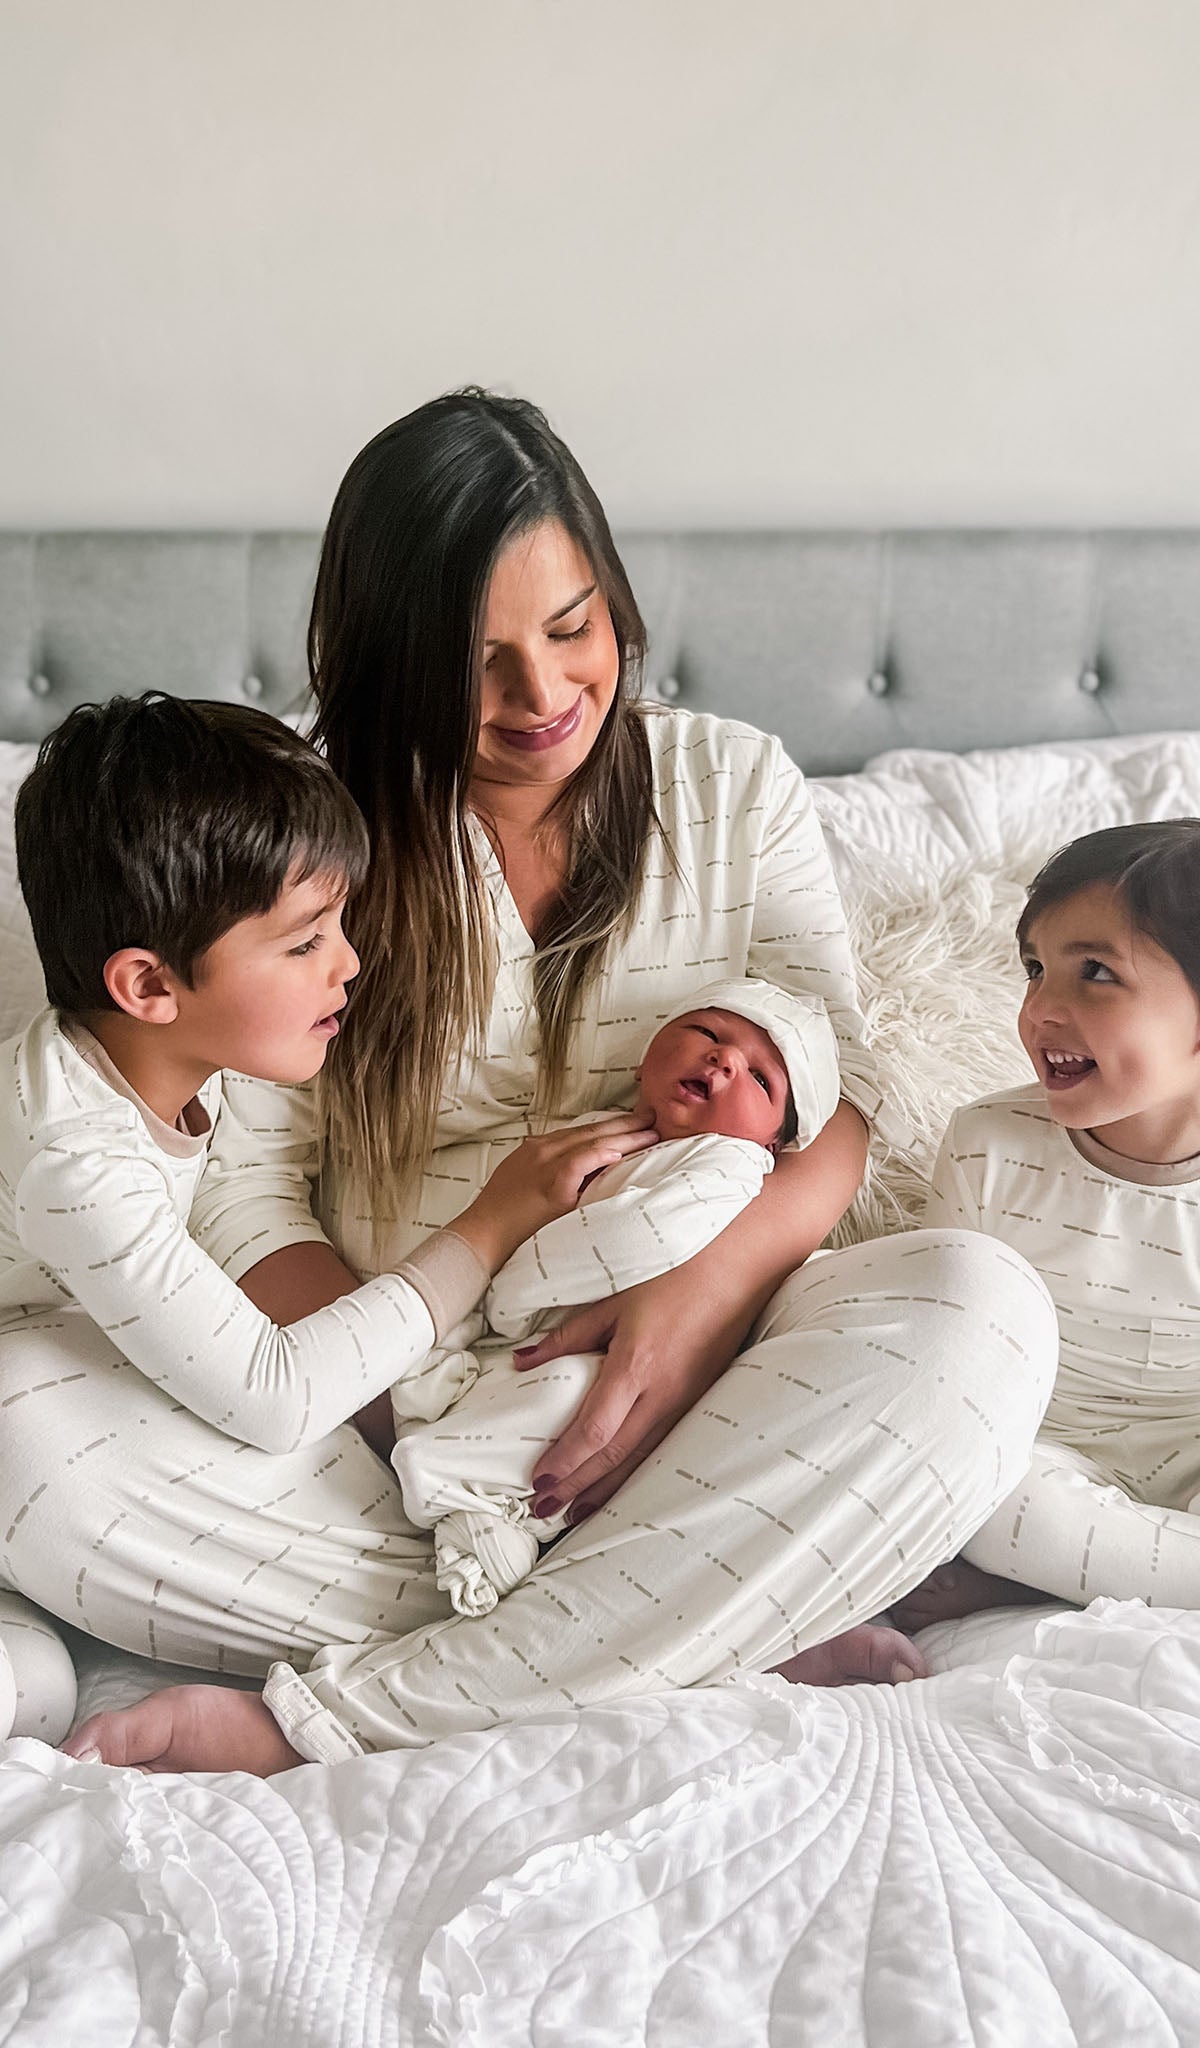 Love Analise 3-Piece Set worn by woman holding her newborn baby with two sons by her side.